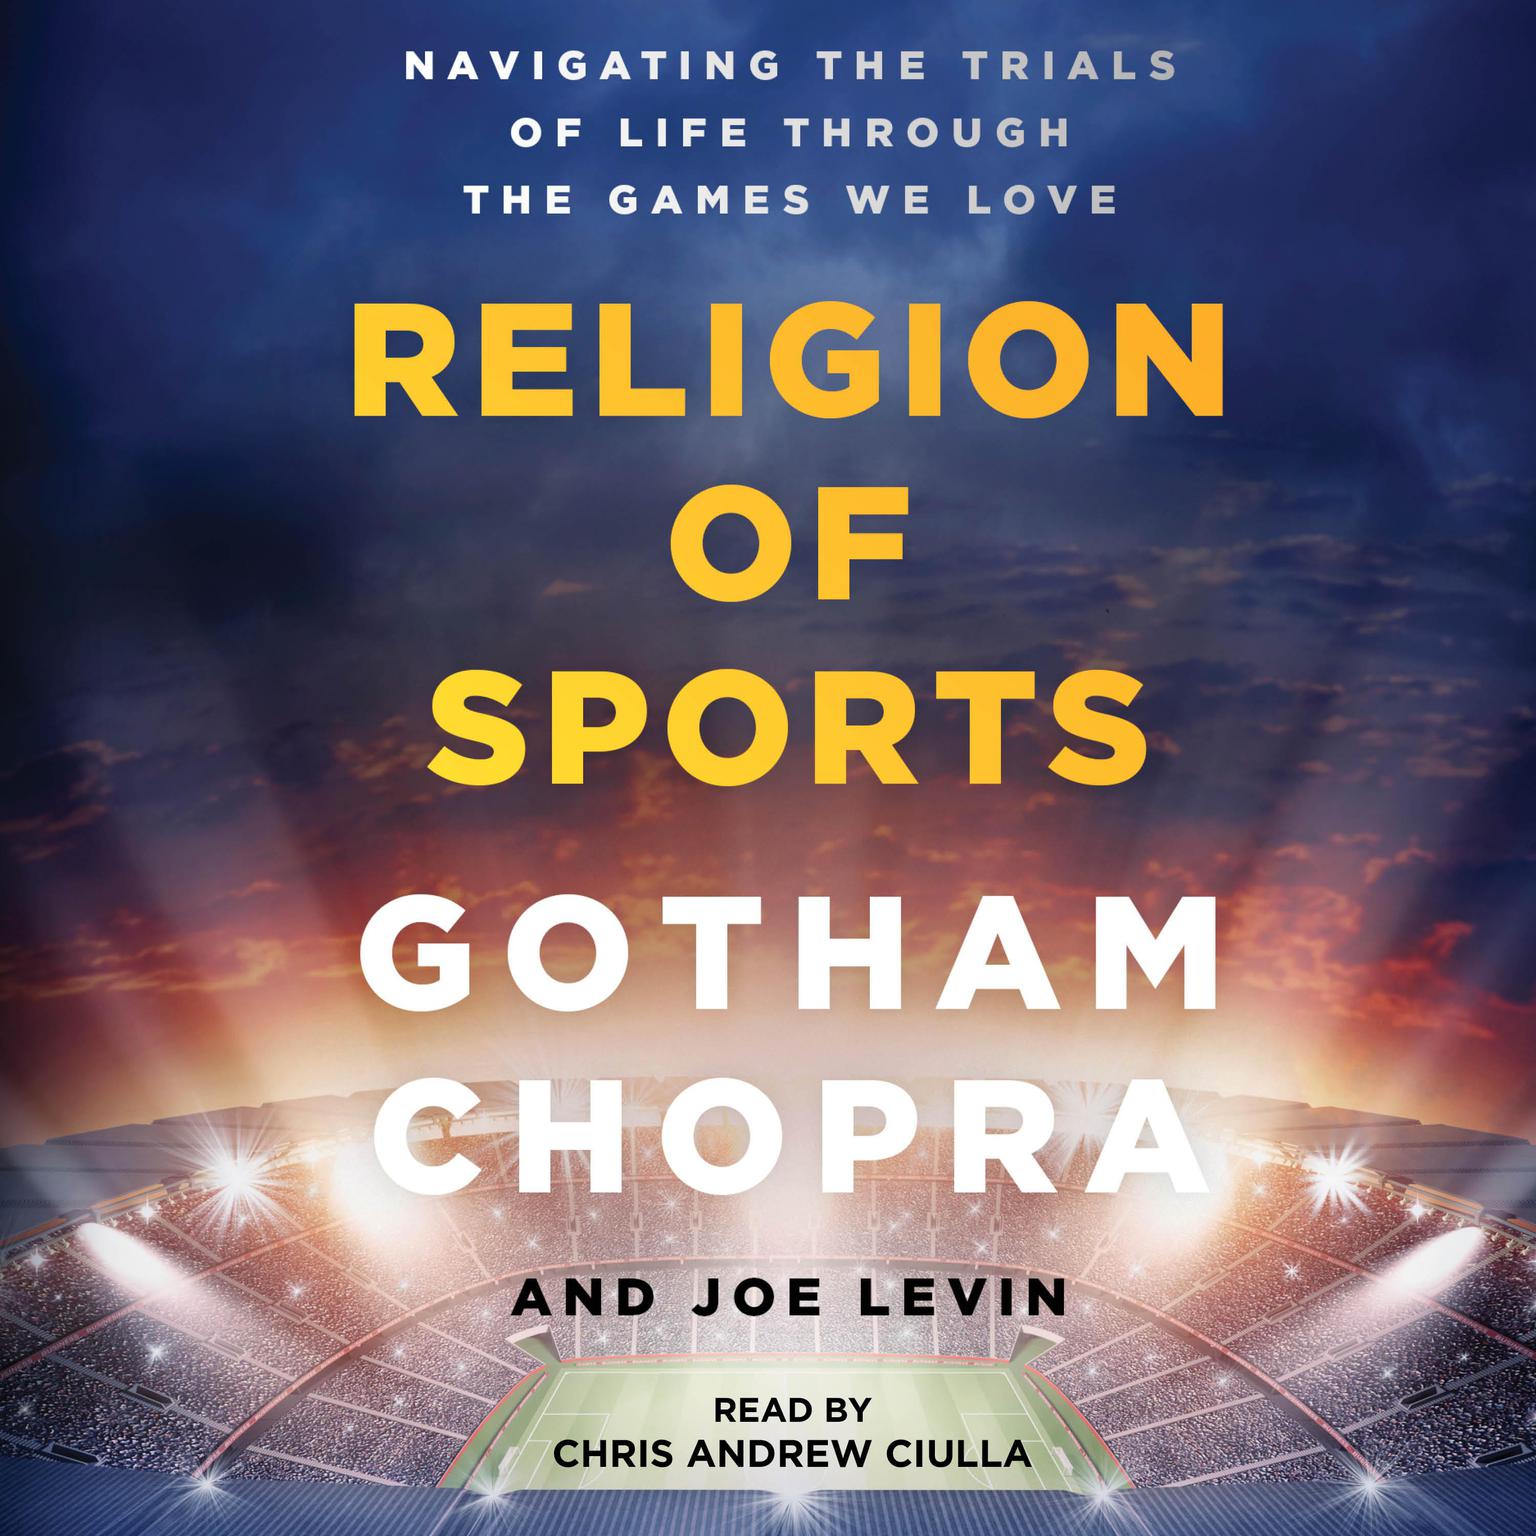 Religion of Sports: Navigating the Trials of Life through the Games We Love Audiobook, by Gotham Chopra